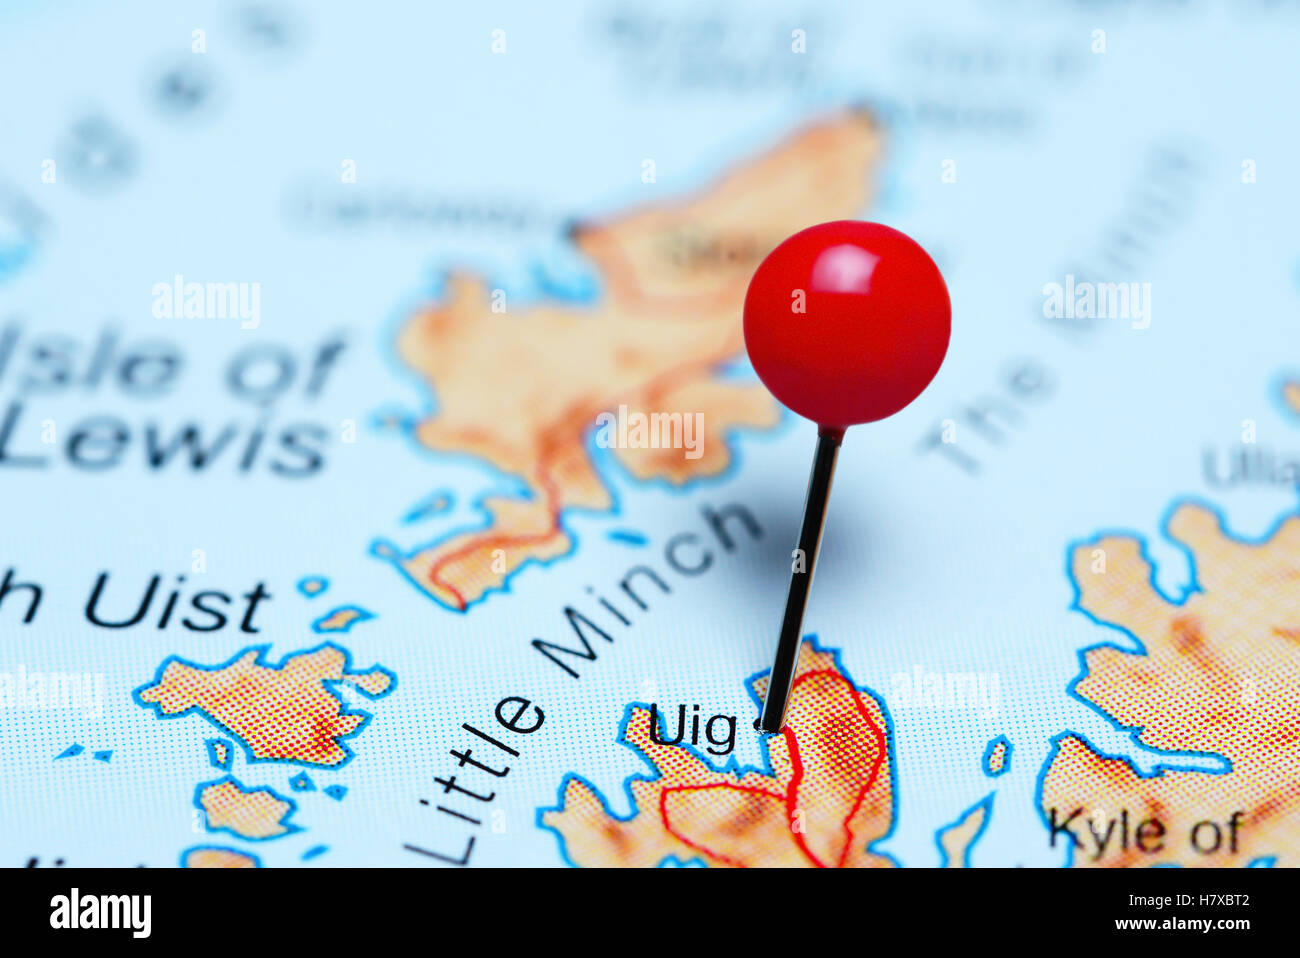 Uig pinned on a map of Scotland Stock Photo